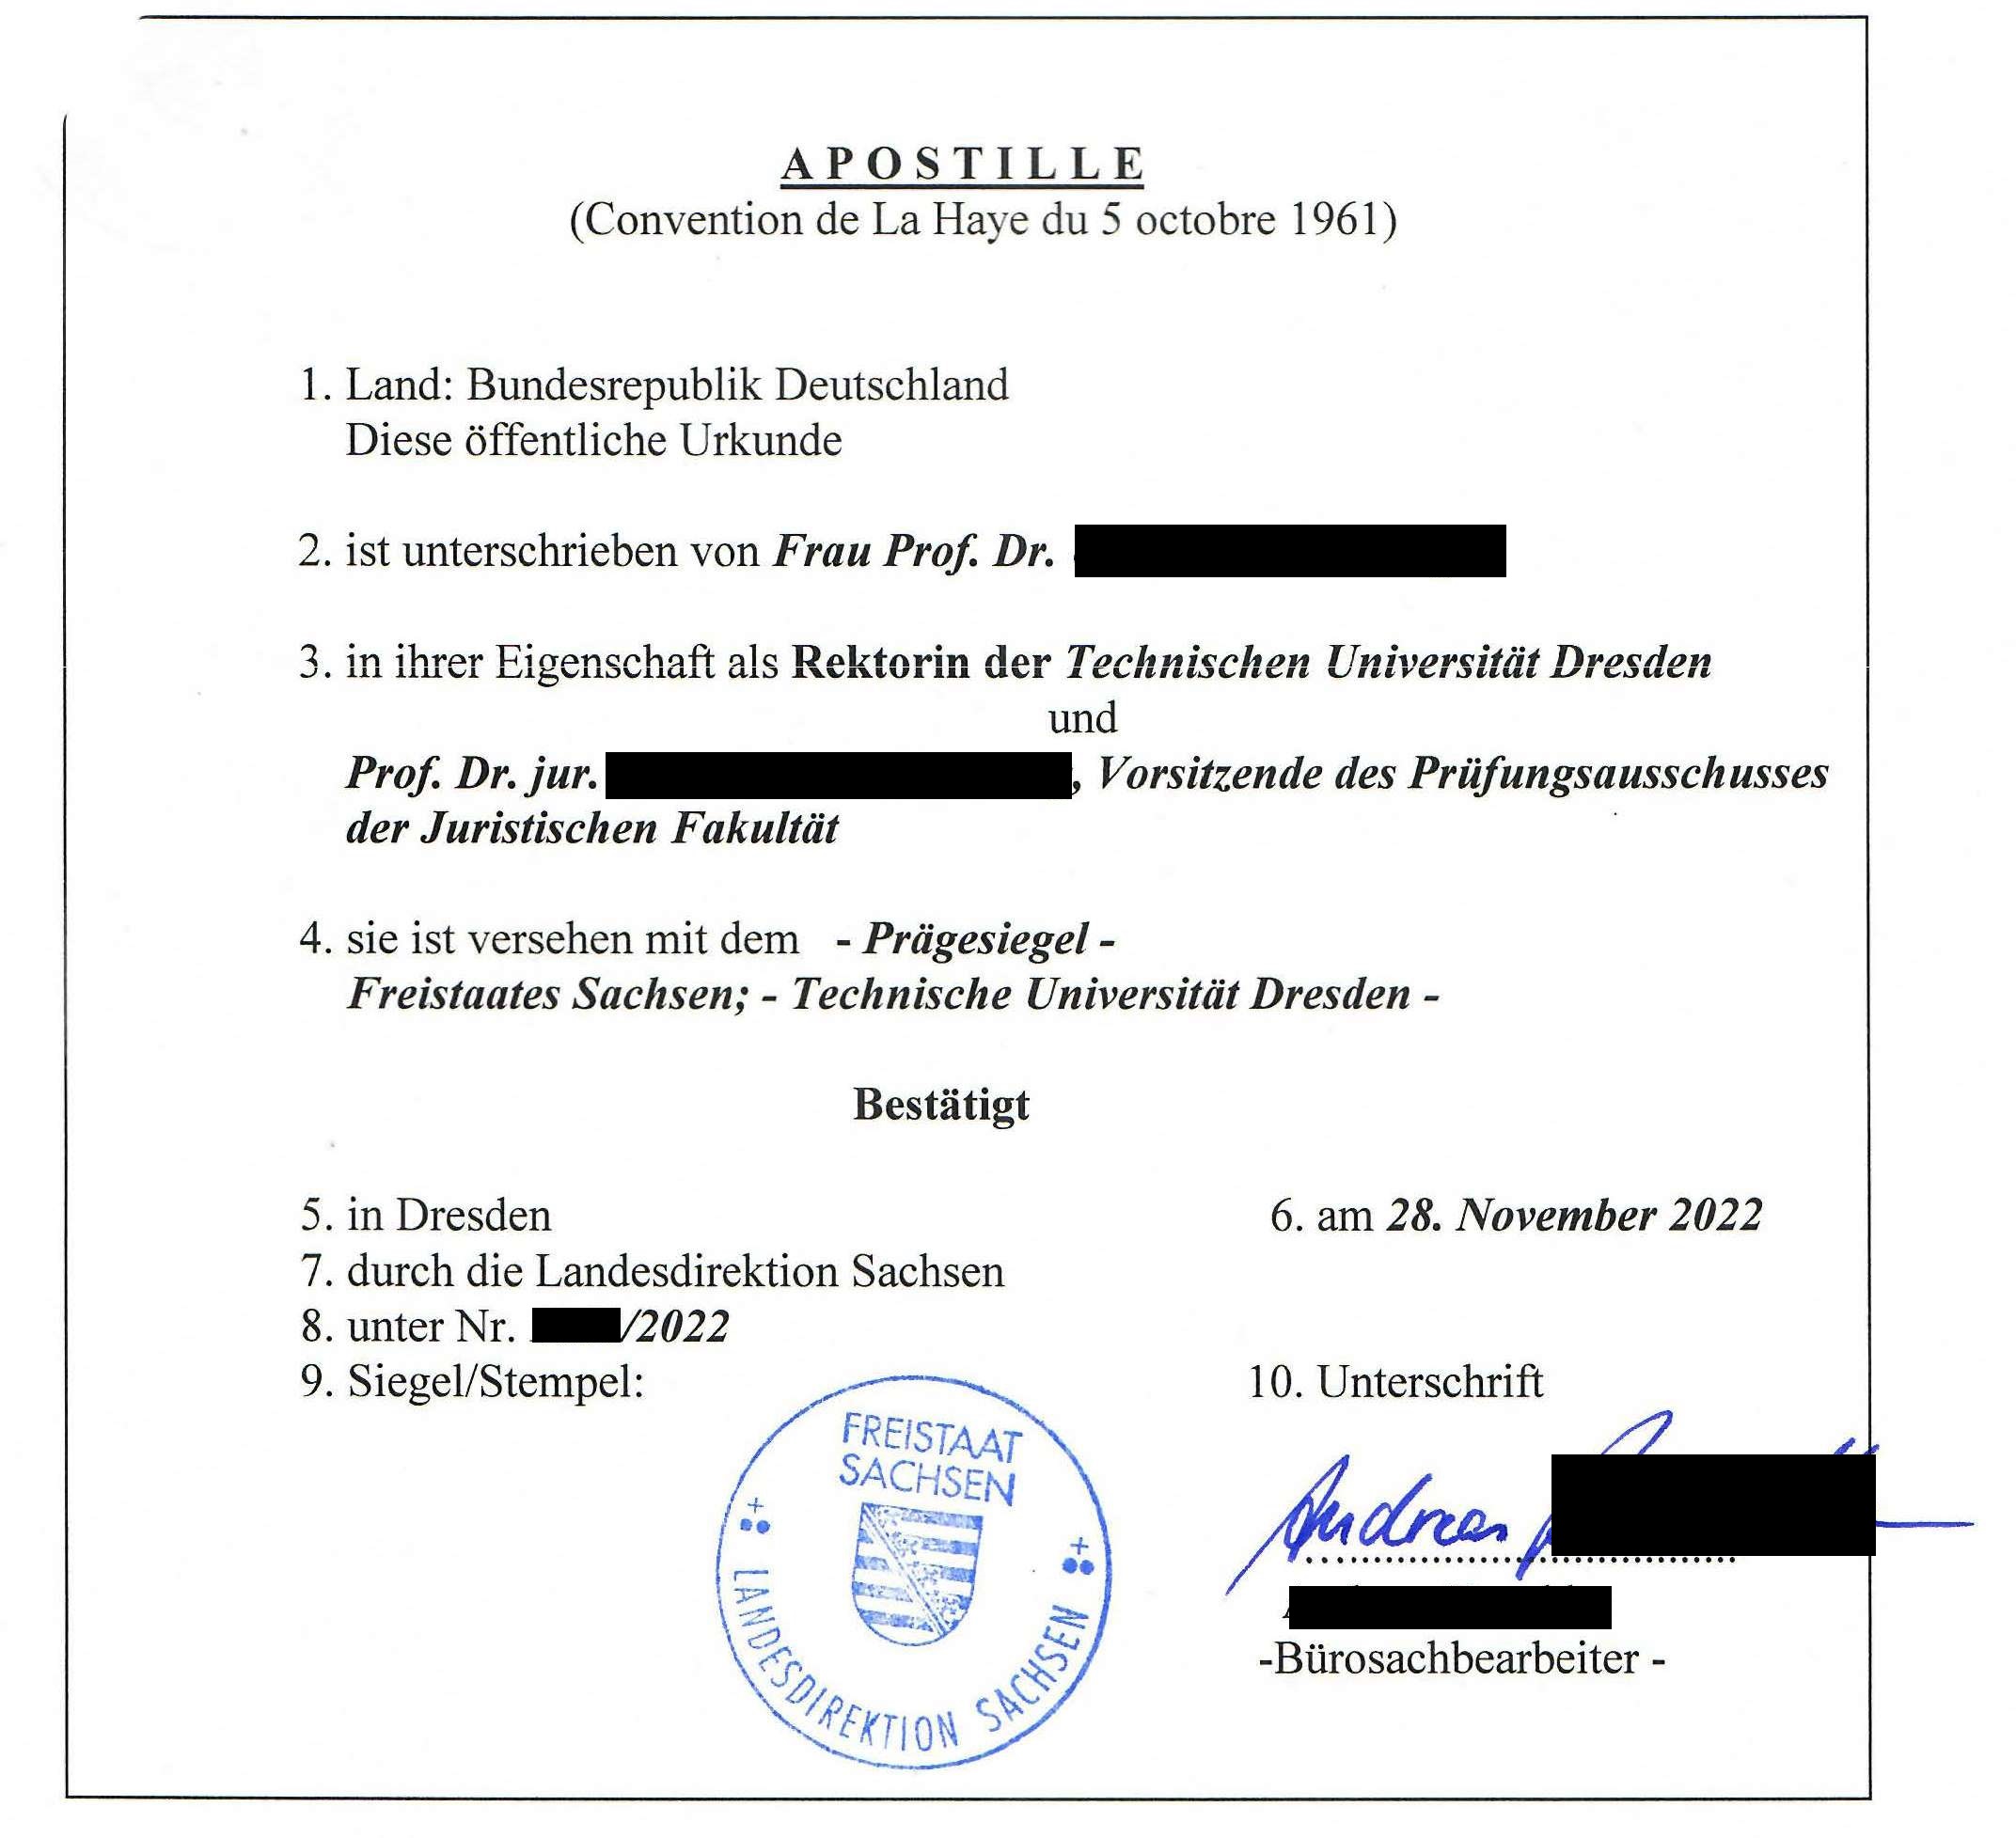 Sample apostille on the degree in Germany